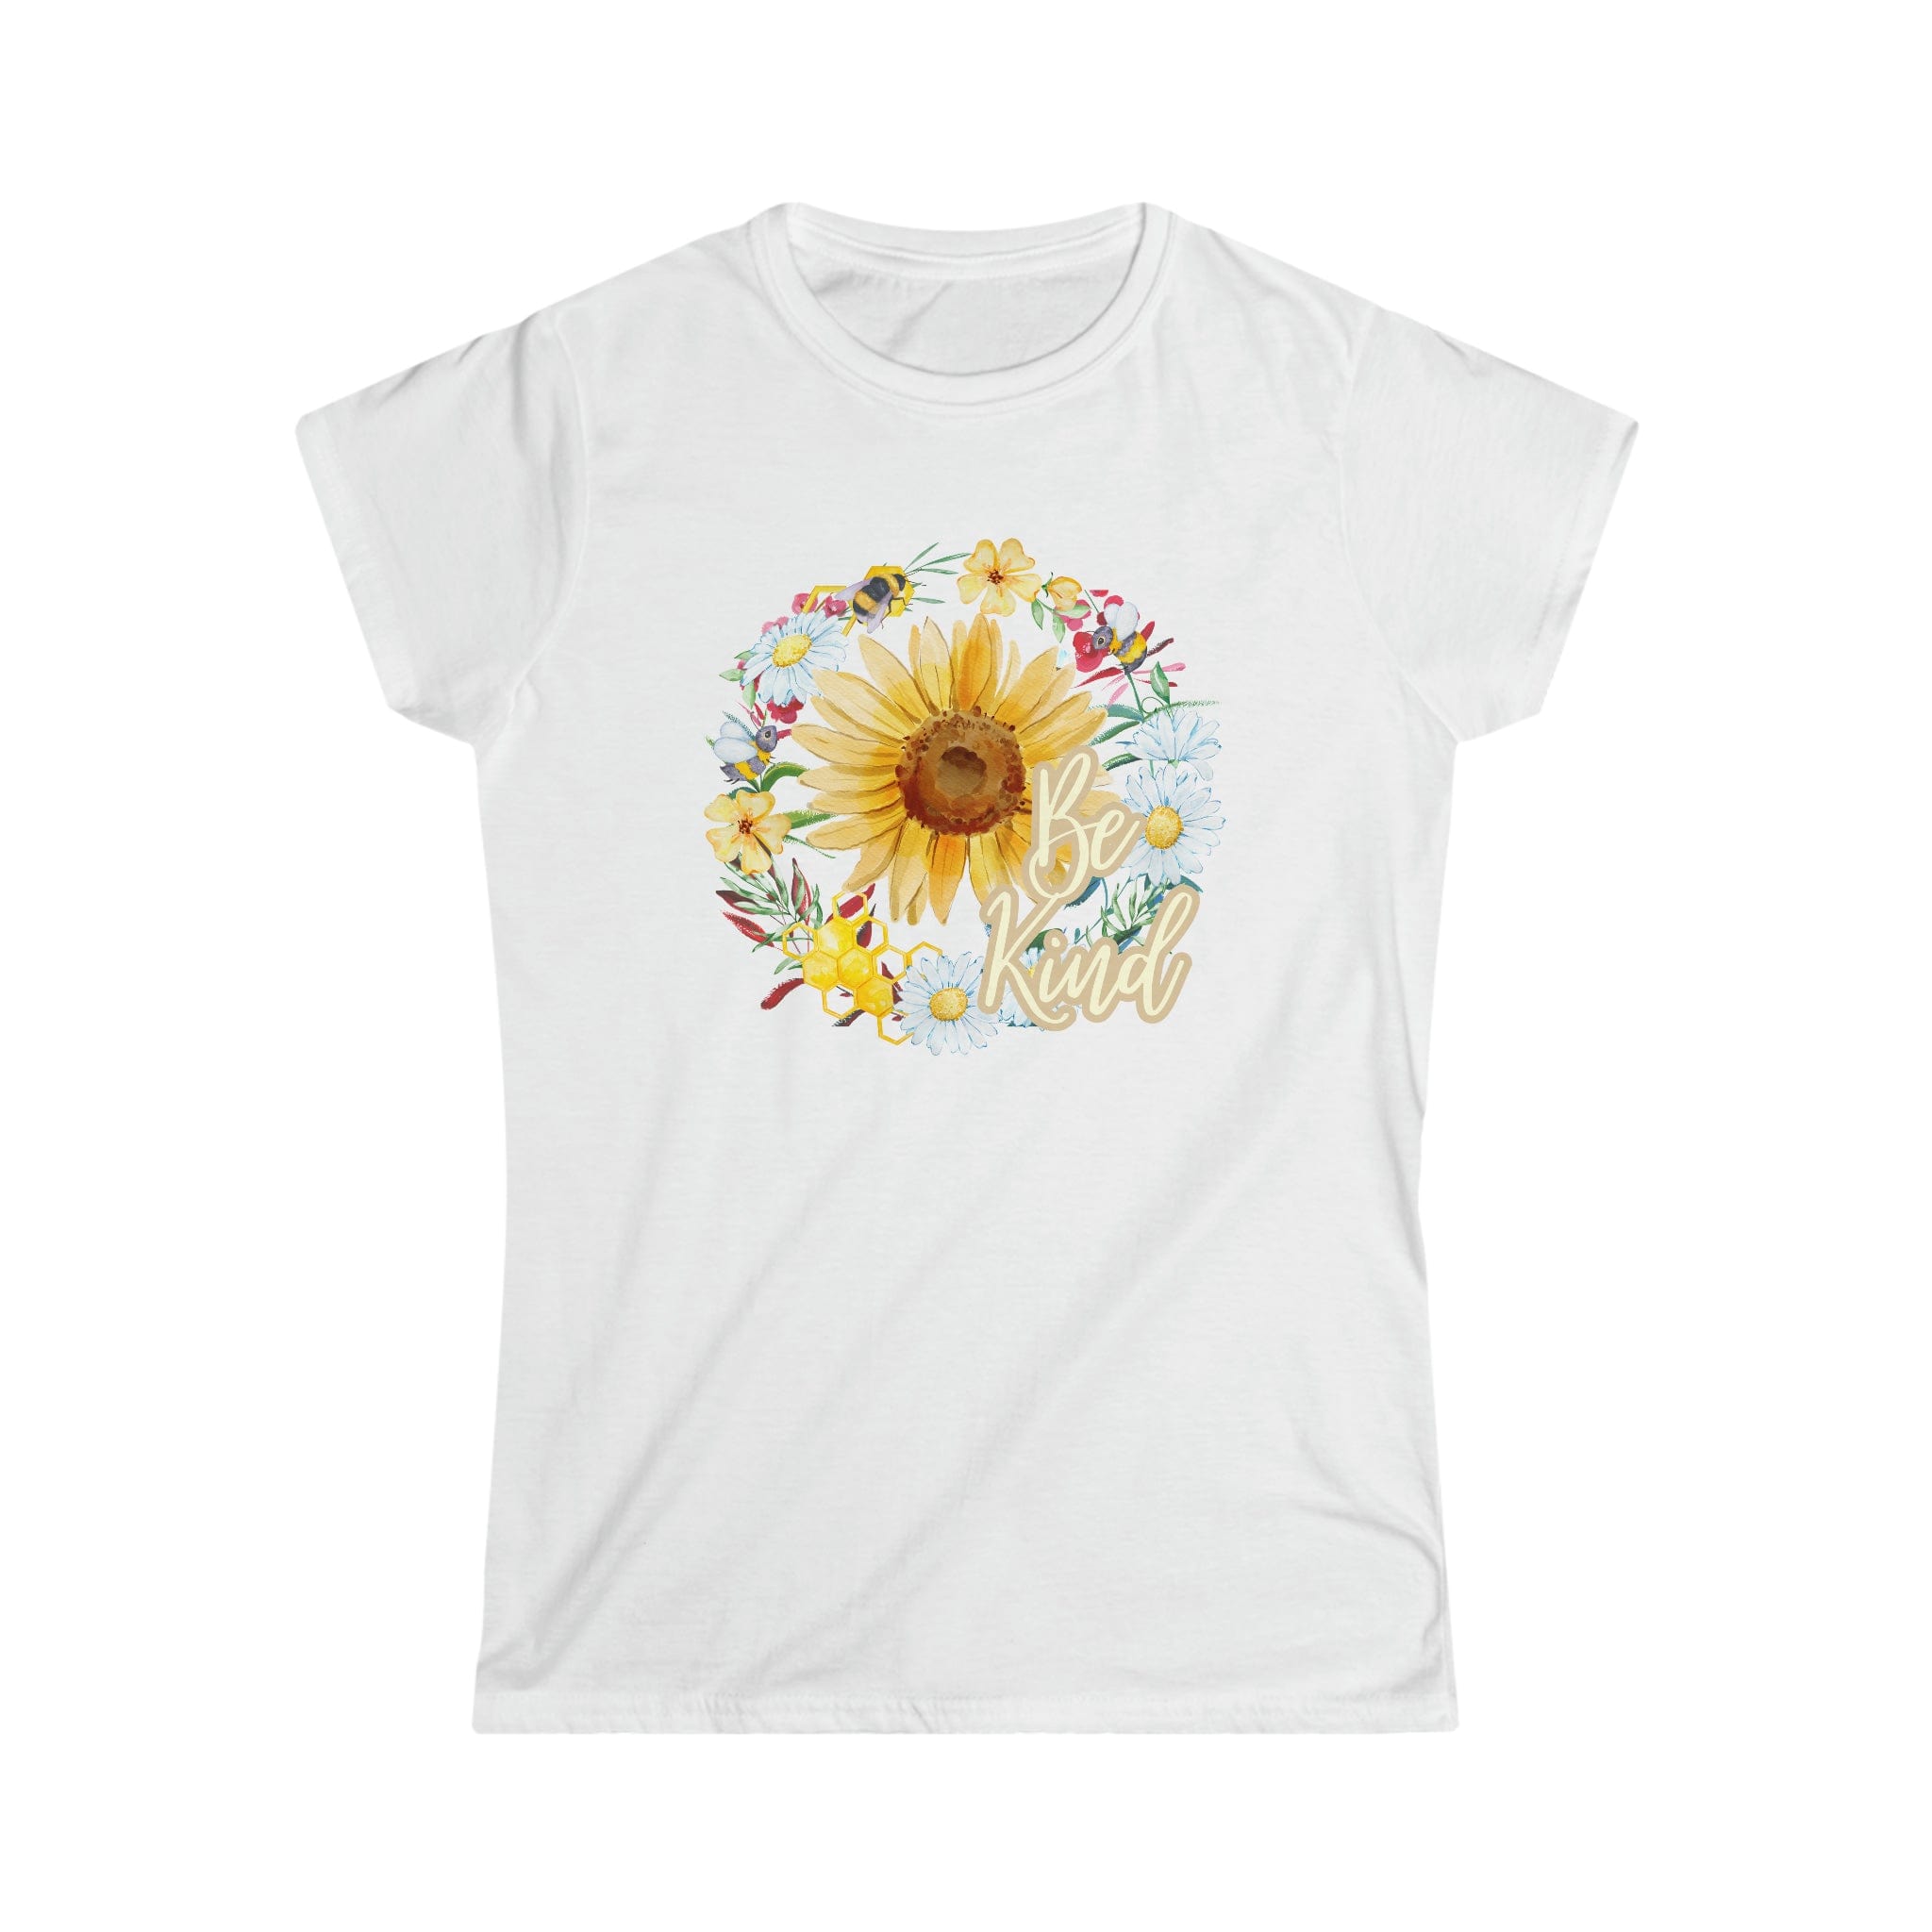 Printify T-Shirt White / S Be Kind - Women's Softstyle Tee